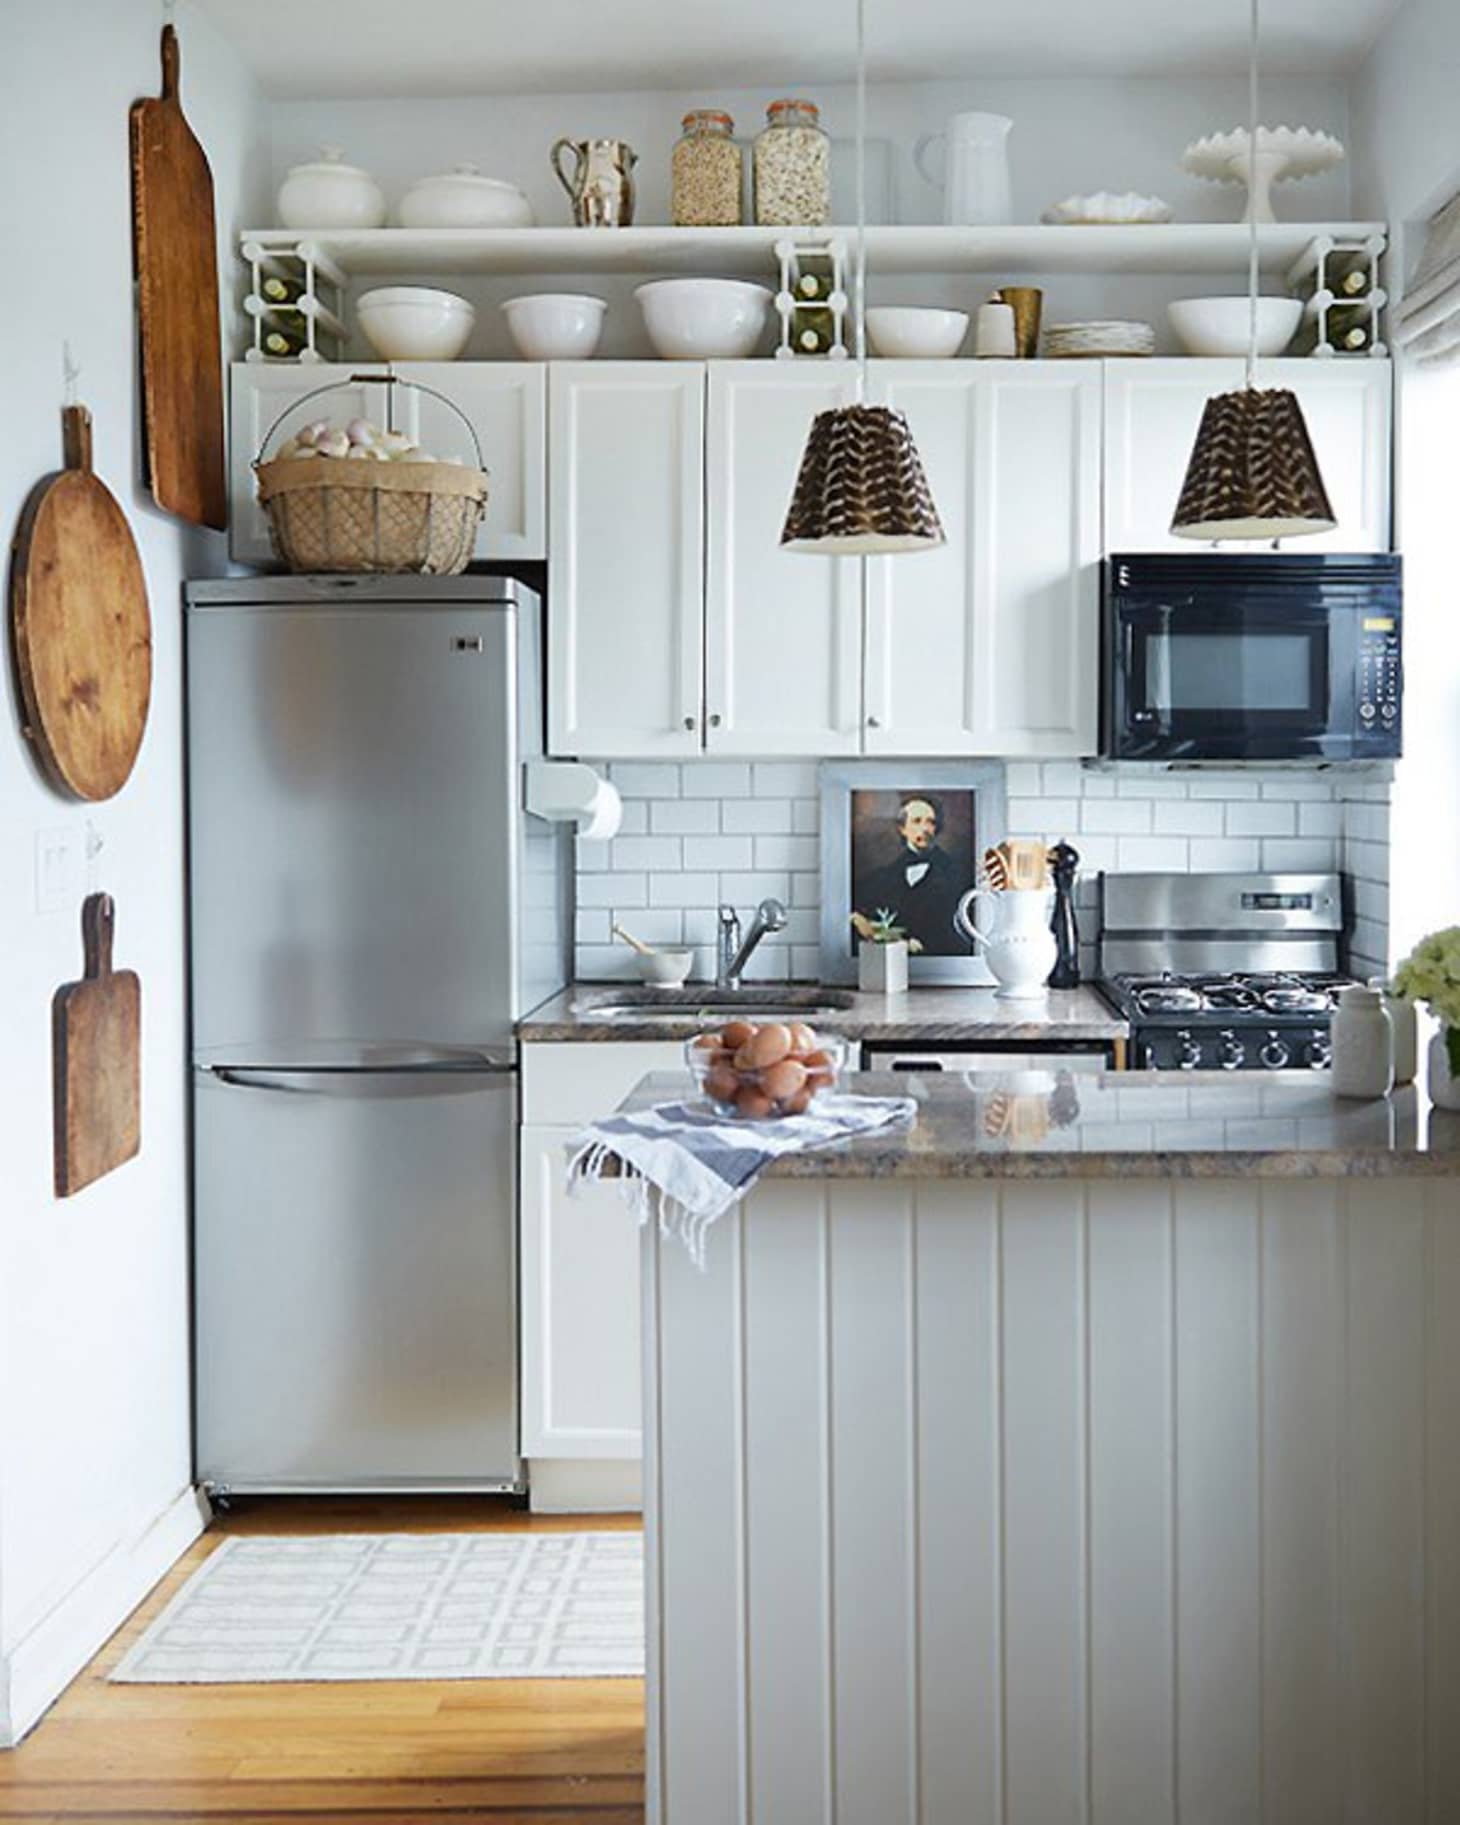 9 Ways To Squeeze More Storage Out Of Your Tiny Kitchen Kitchn